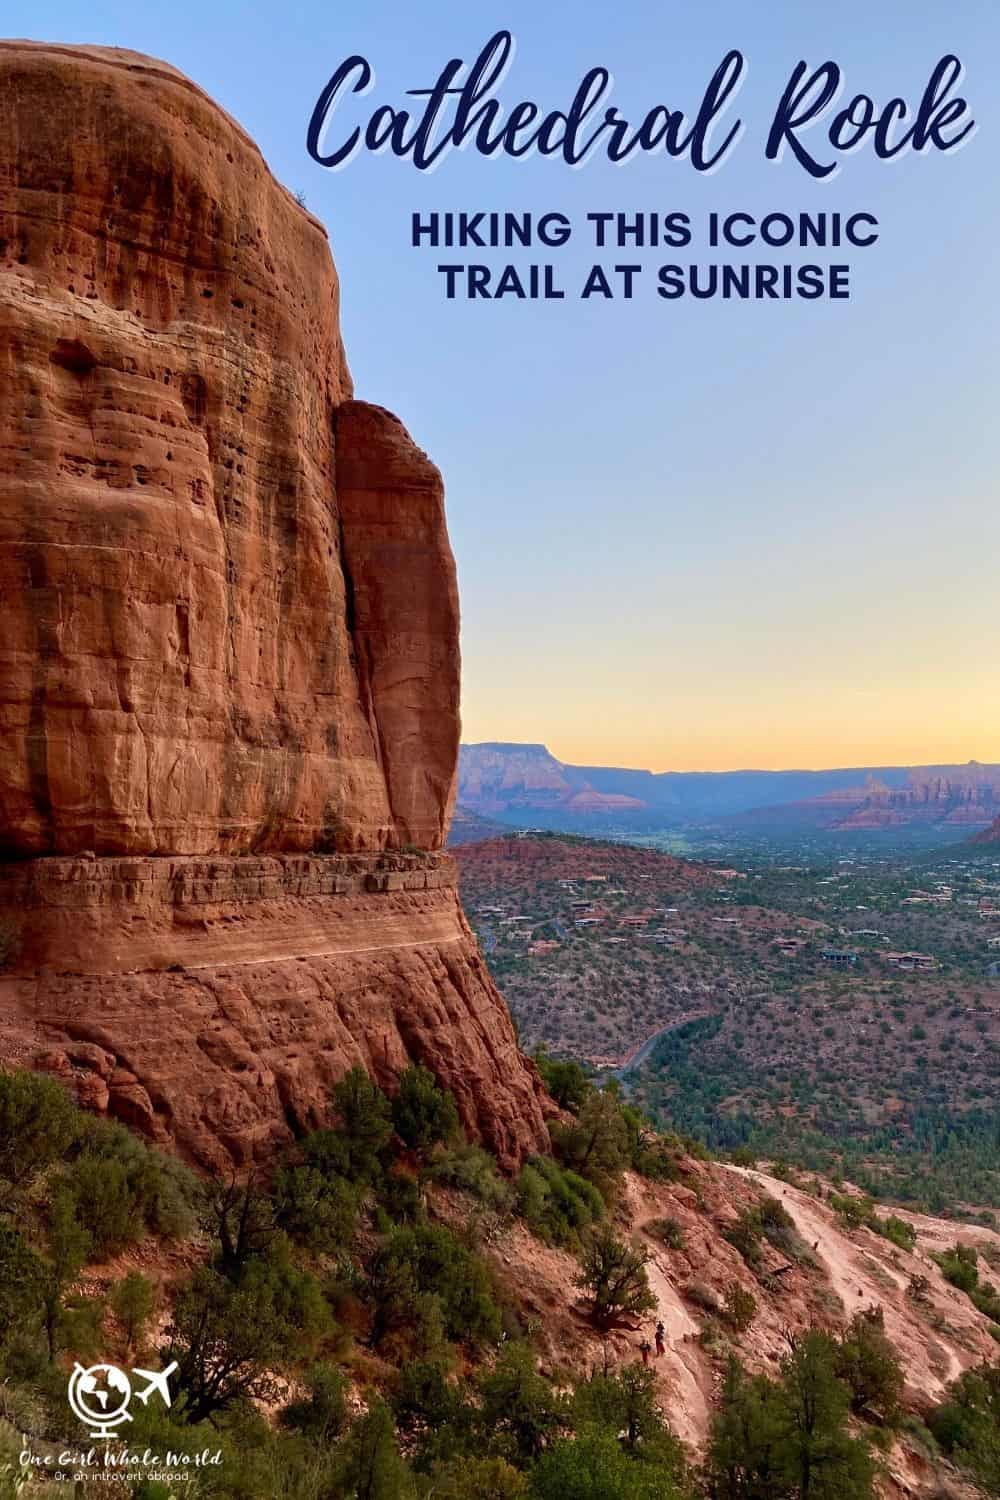 What It's Like Hiking Sedona's Cathedral Rock at Sunrise | This iconic & challenging hike is stunning any time of day, but sunrise is a particularly magical experience. How to determine if Cathedral Rock Sedona is the right hike for you (heights, steepness, etc), & tips for making the most of it. #cathedralrock #sedona #hiking #sunrisehike